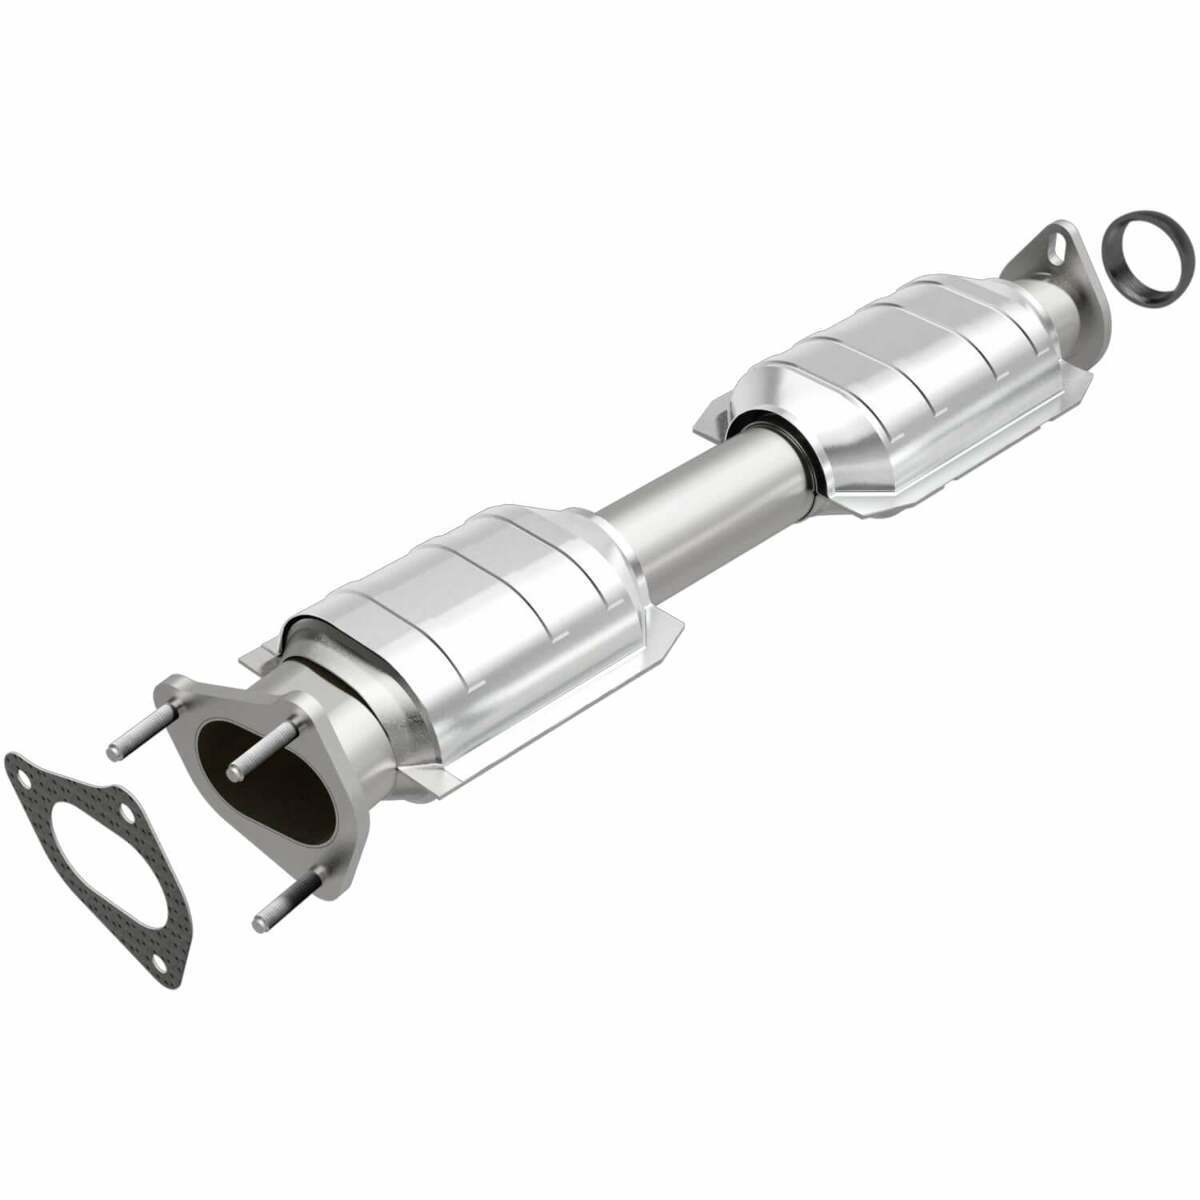 Fits 1990 Ford Bronco II Direct-Fit Catalytic Converter 333388 Magnaflow